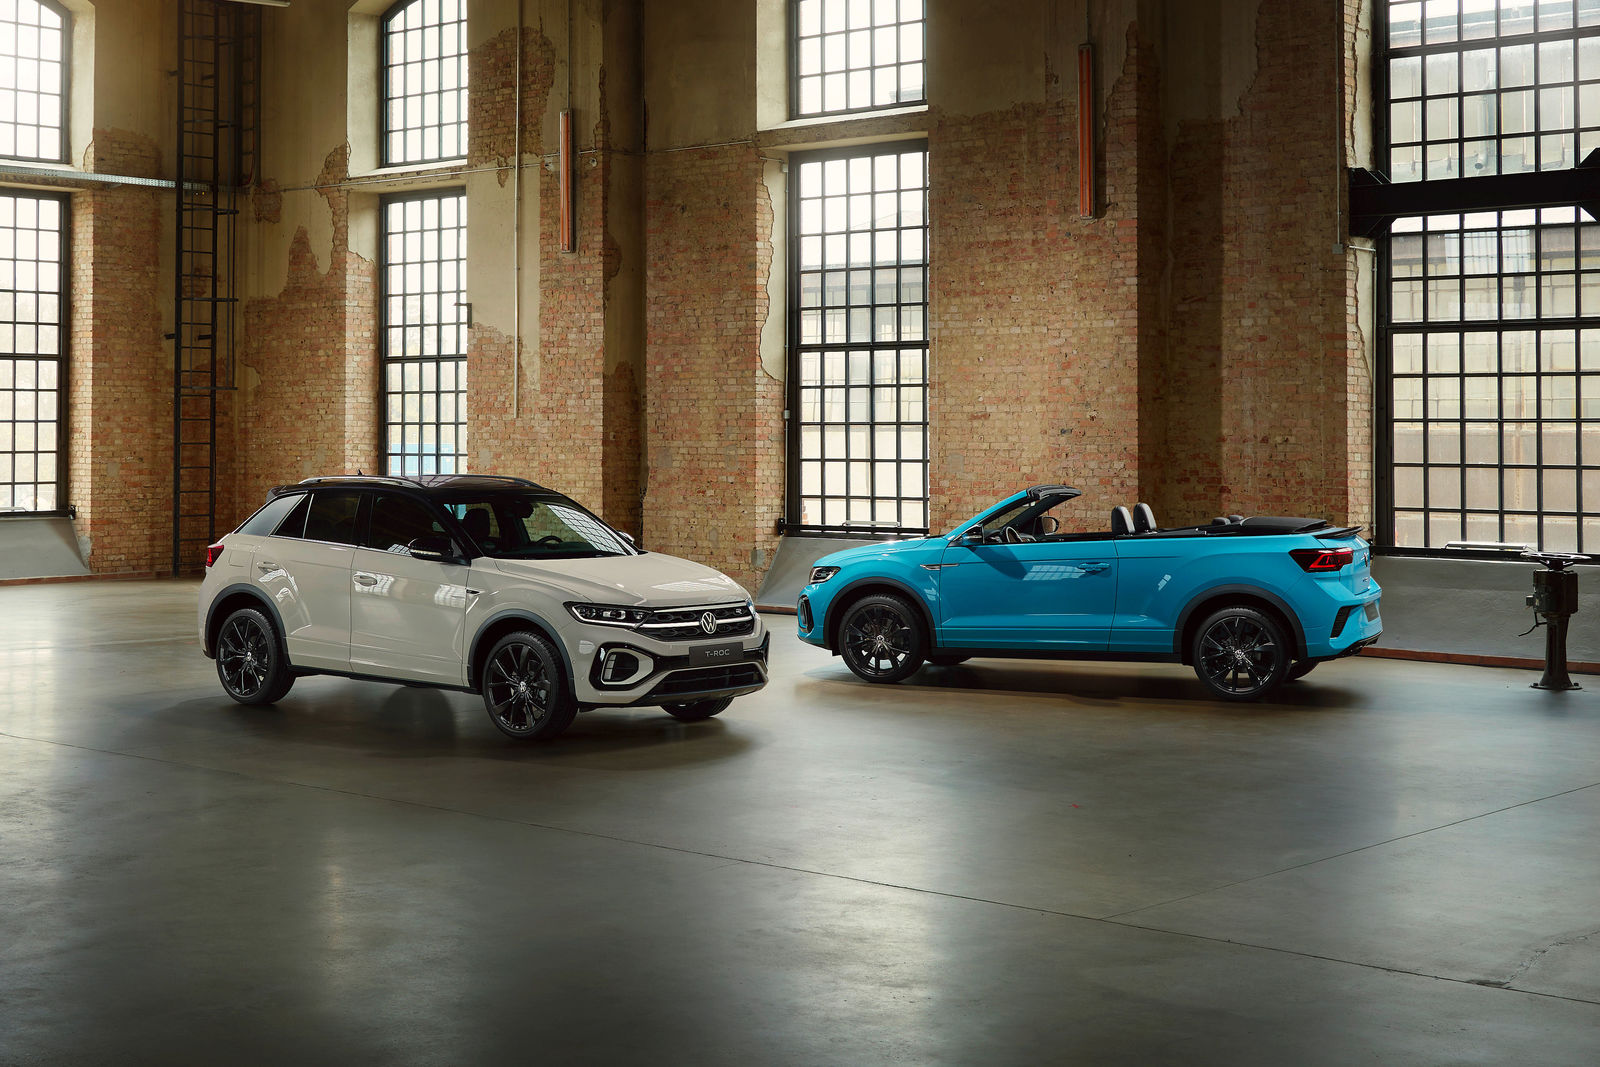 The new Volkswagen T-Roc and T-Roc Cabriolet